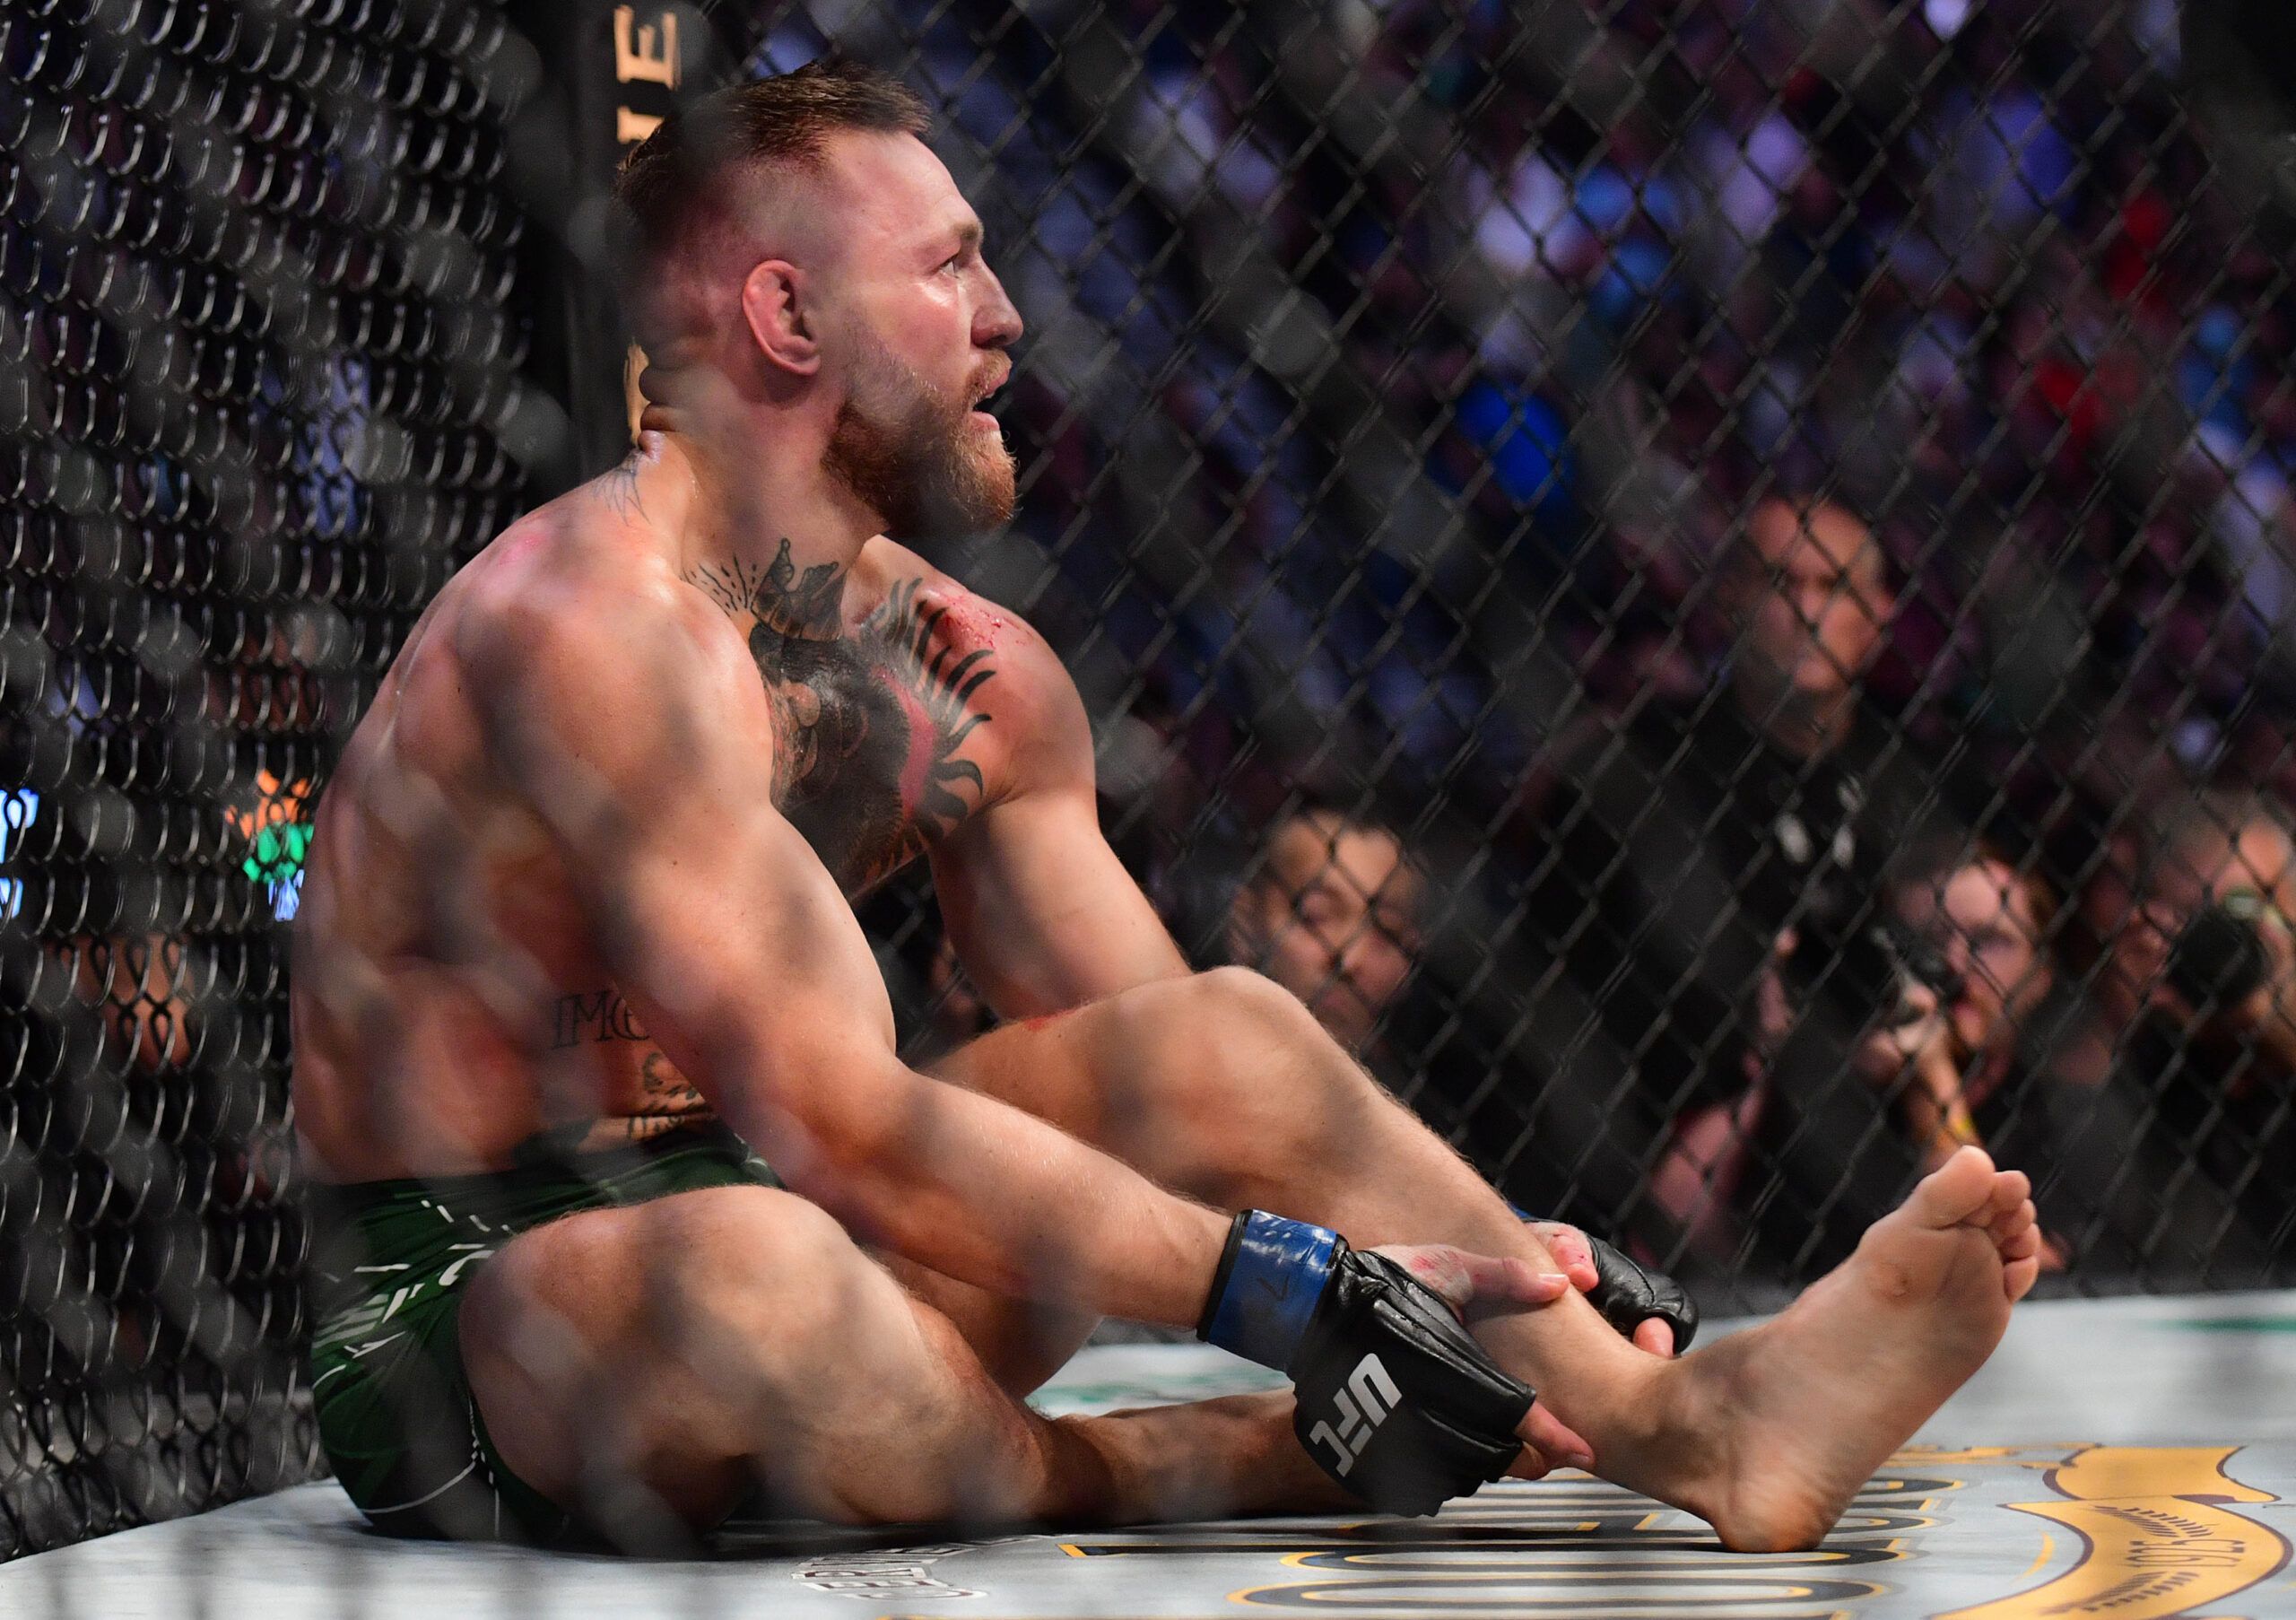 Conor McGregor is still recovering from the horrific broken leg he suffered last July